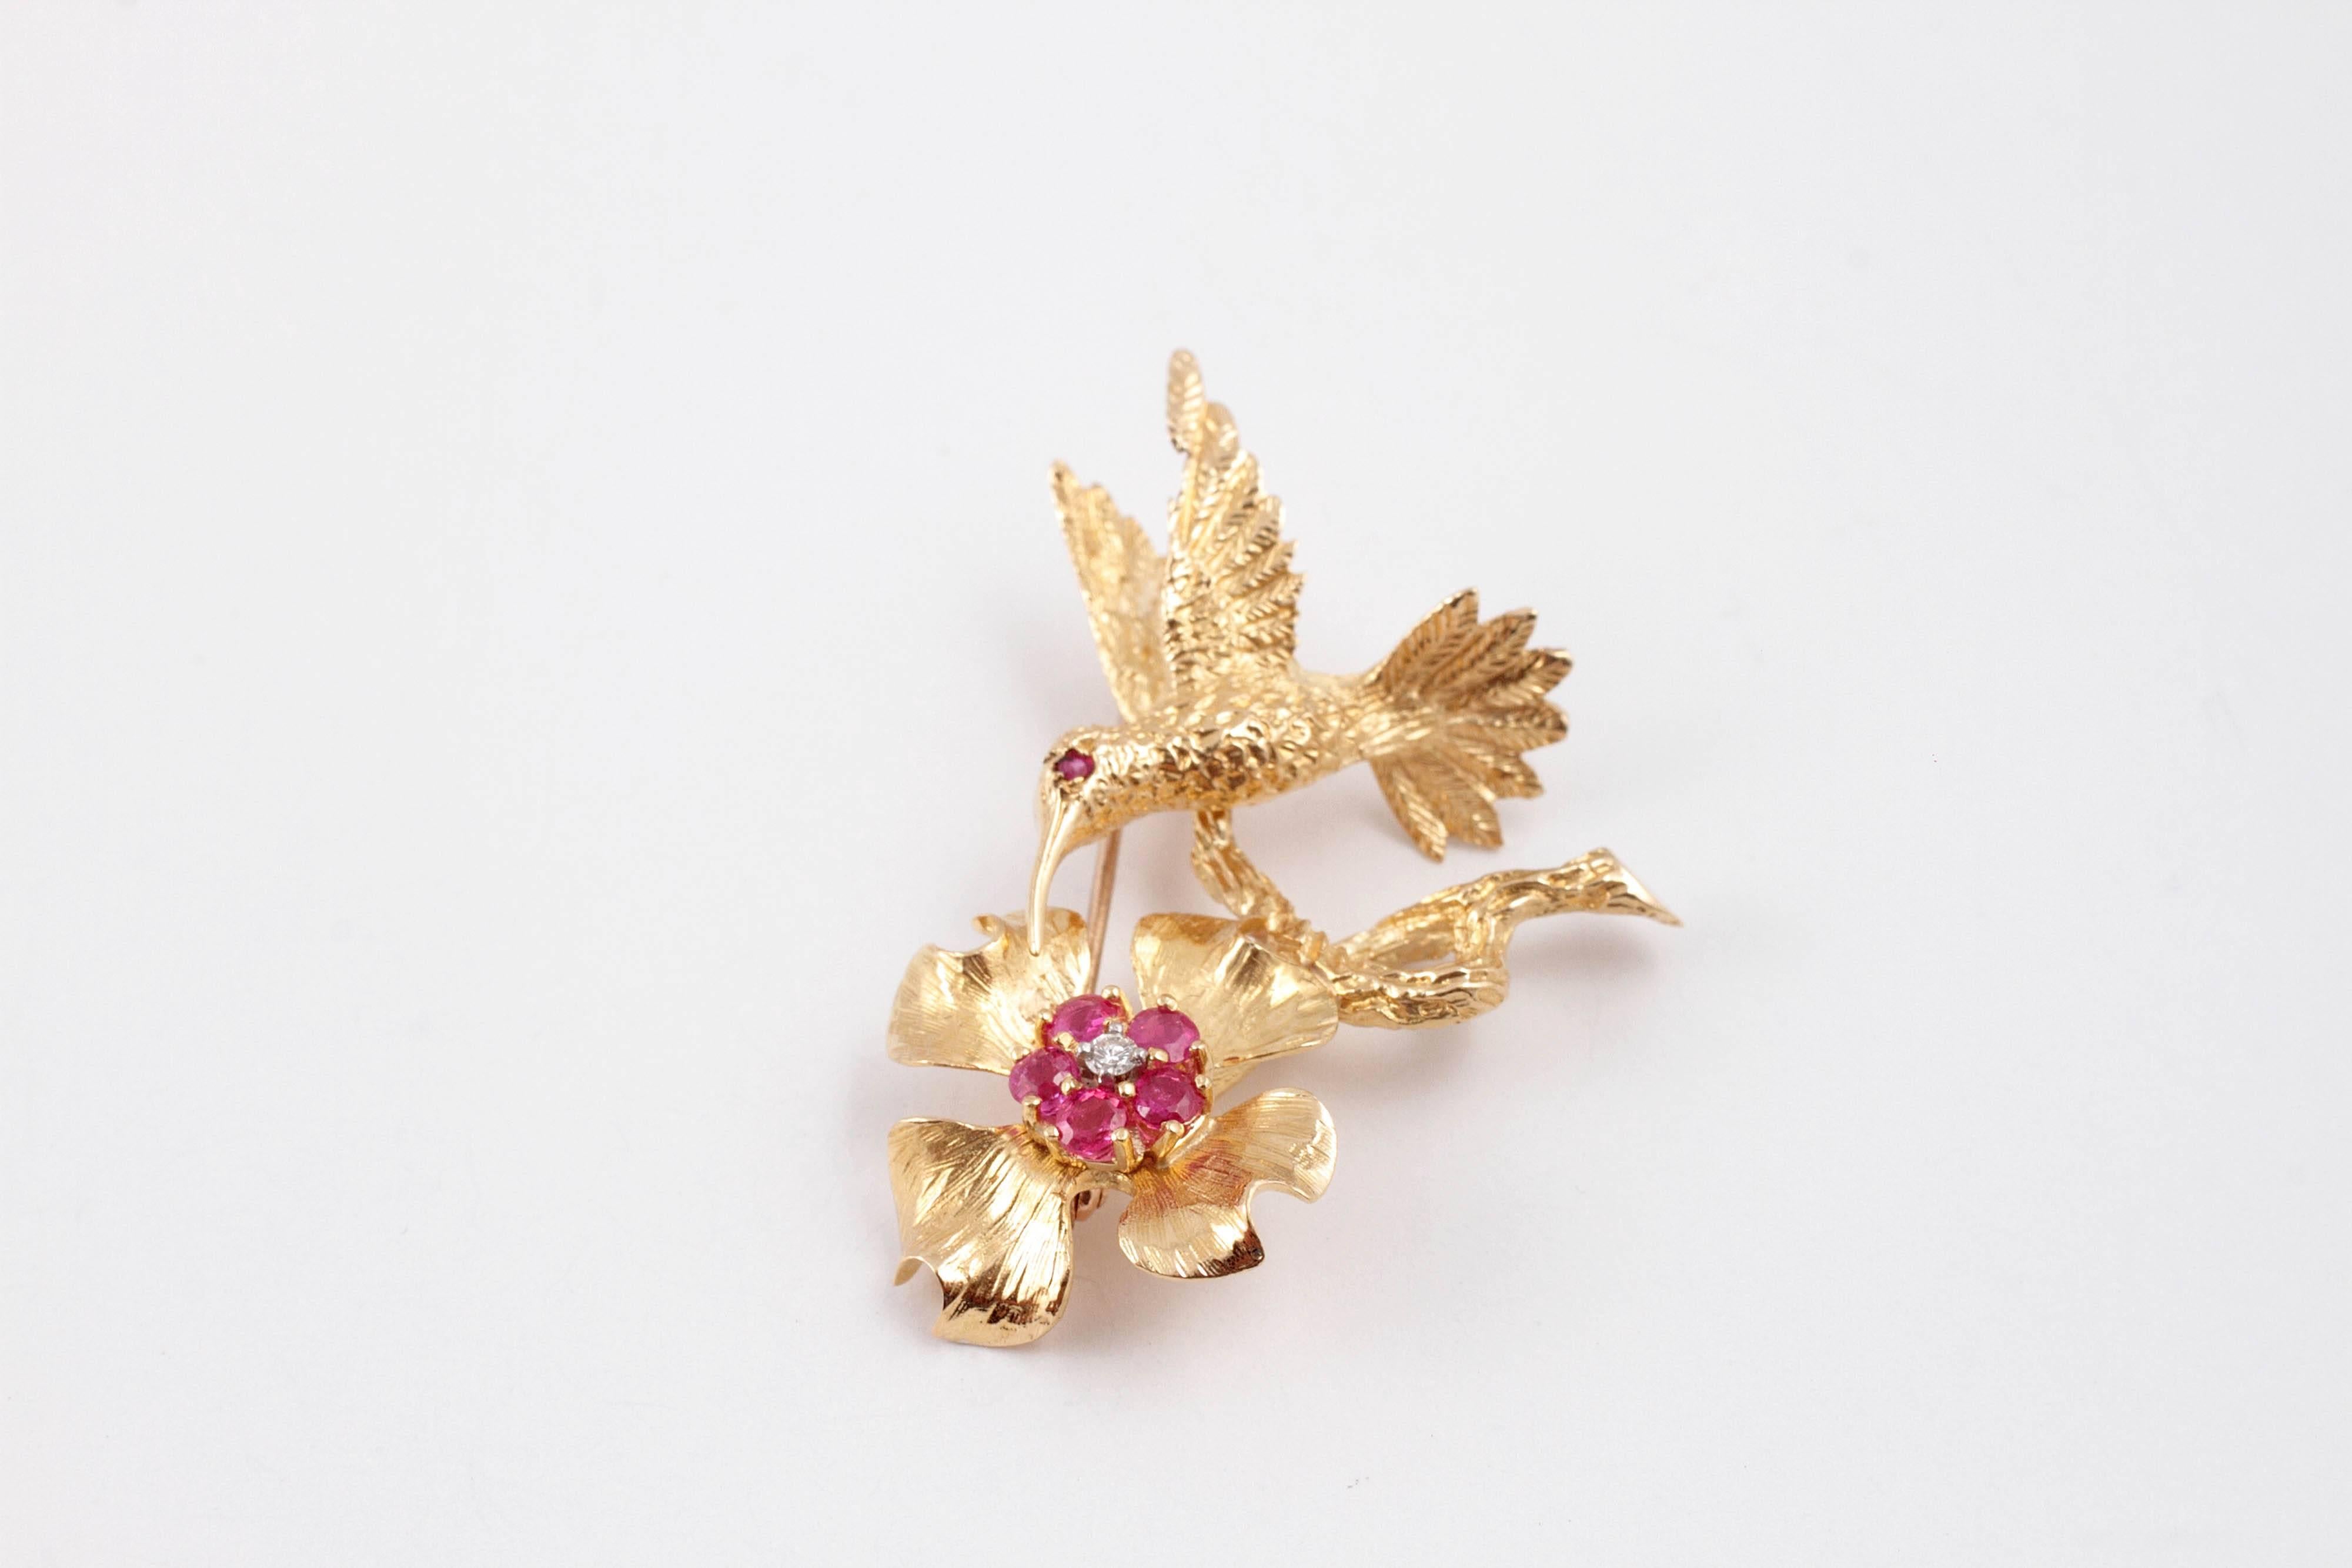 This captures the fanciful flight of a hummingbird! Burma rubies surround an accent diamond, Almost 1 1/2 inches in length.